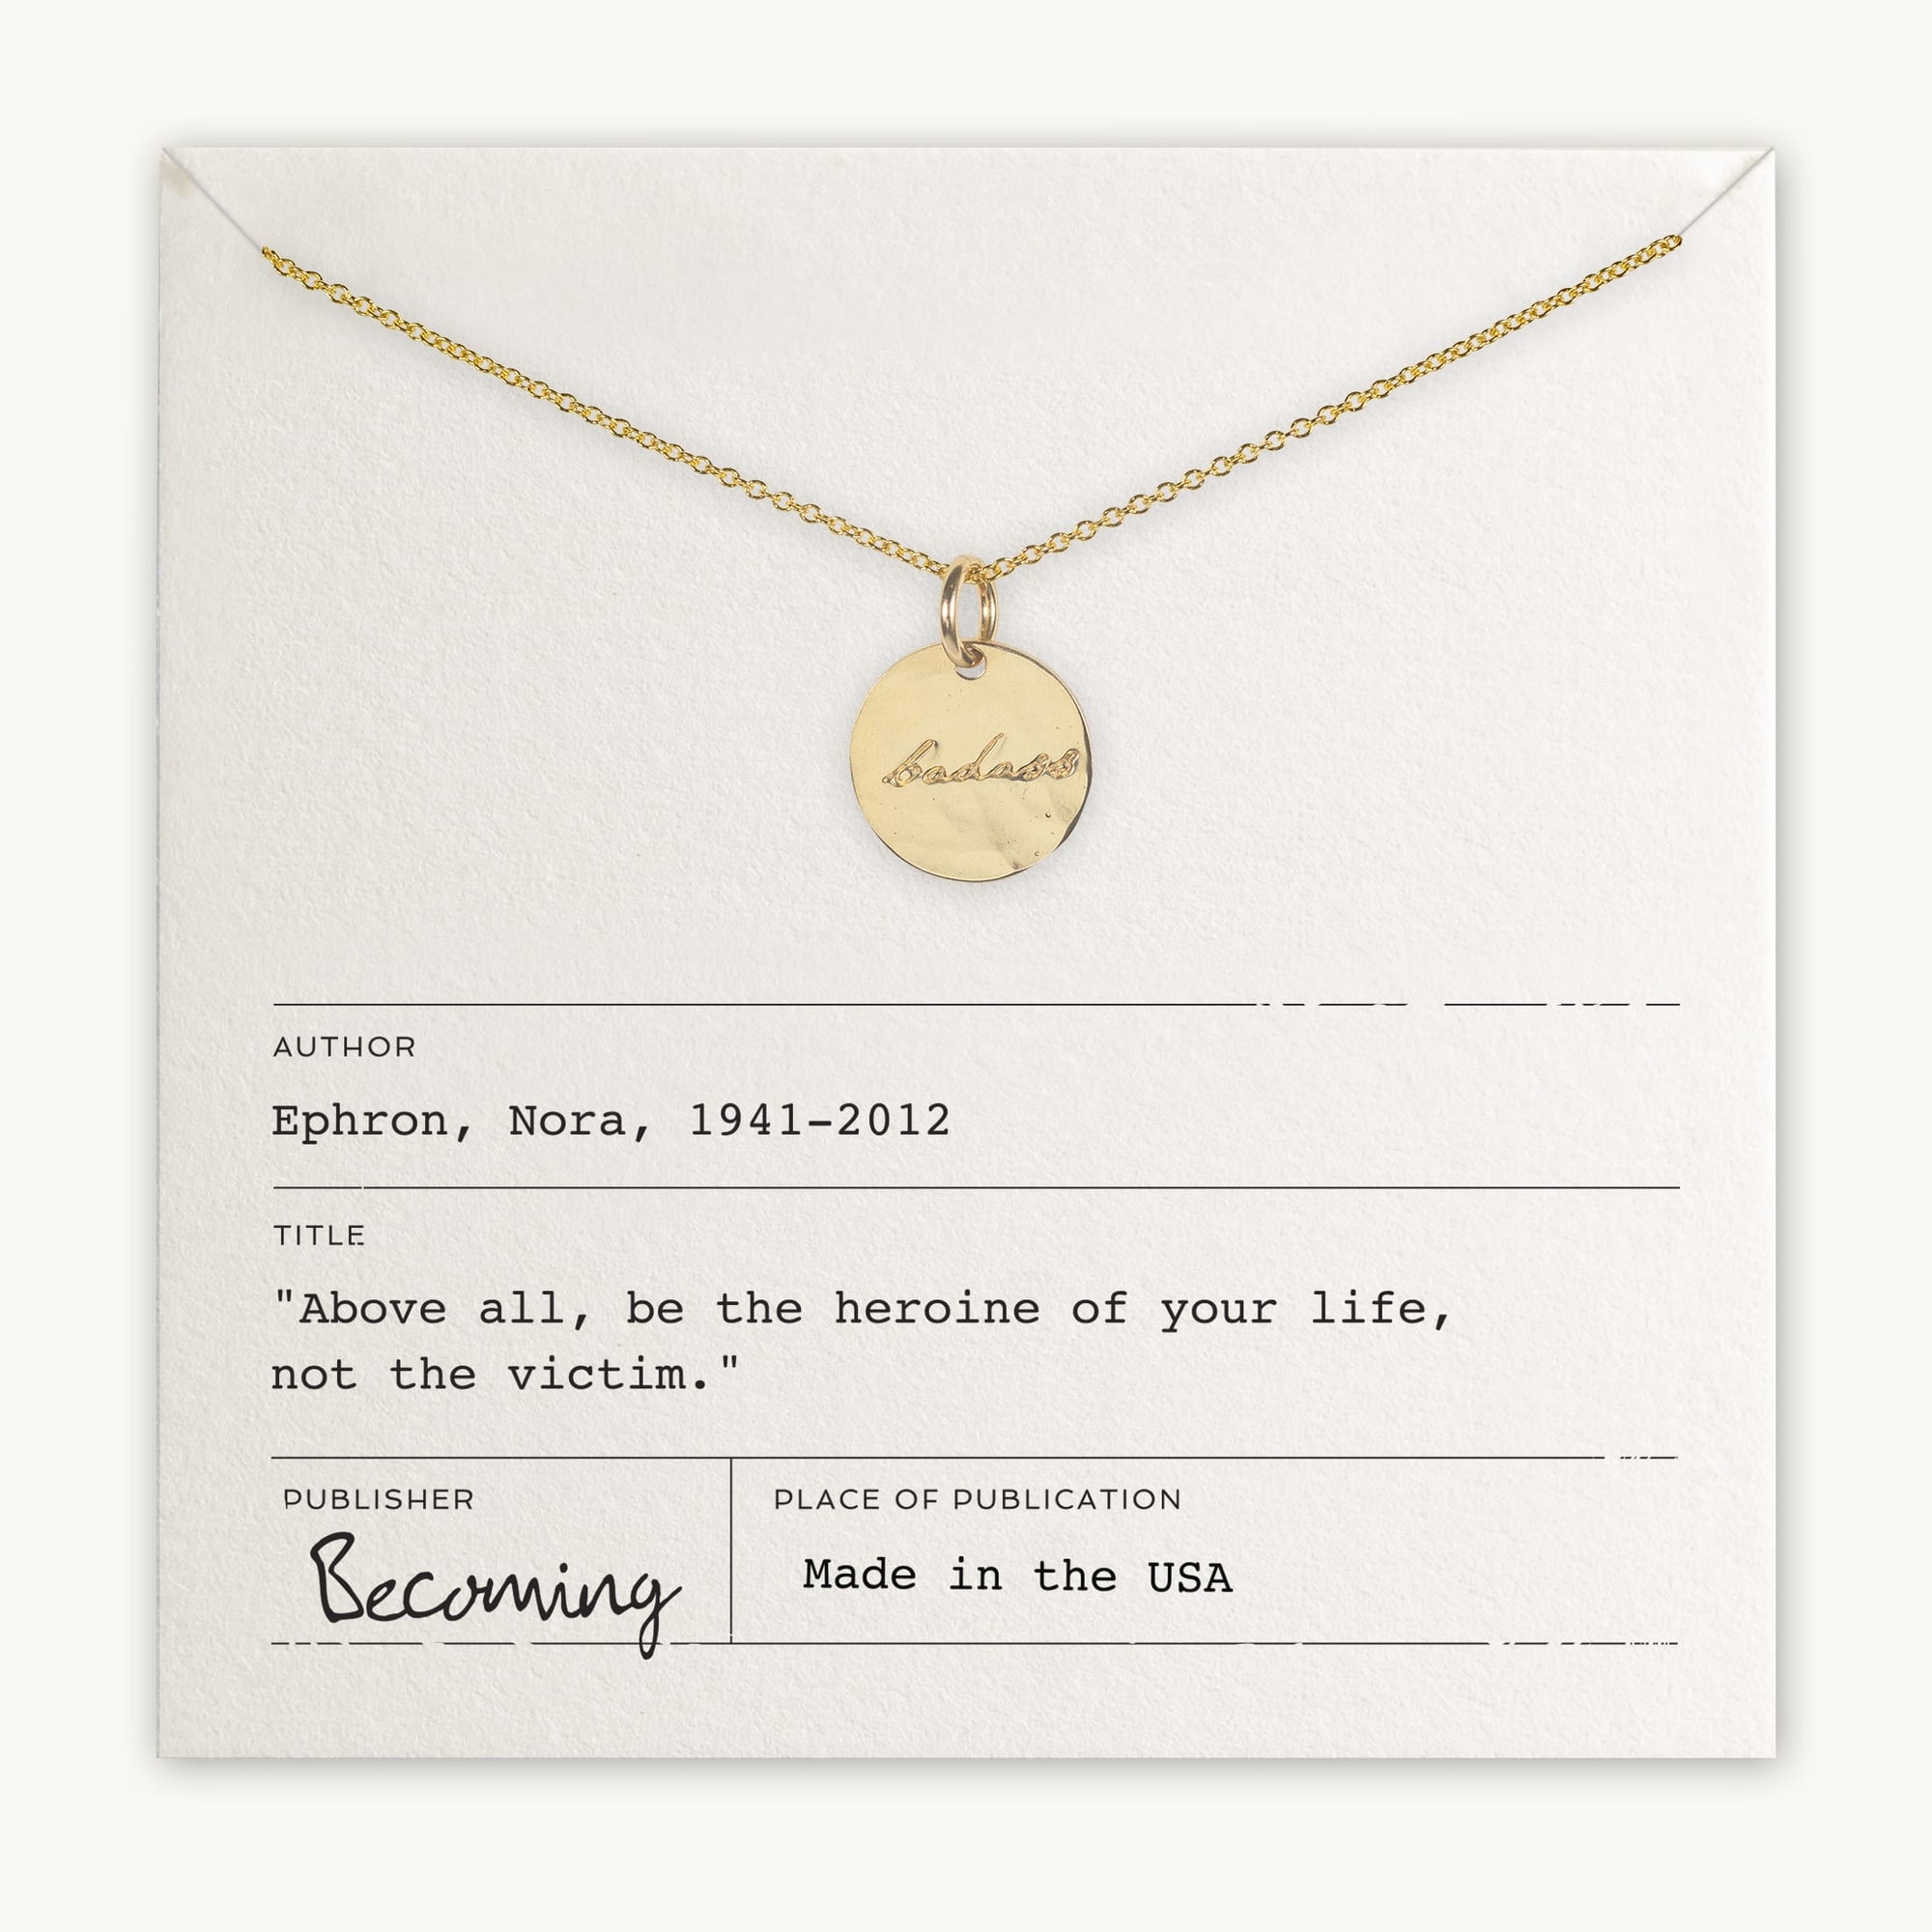 A Badass Necklace by Becoming Jewelry with the word &quot;becoming&quot; engraved, displayed on a card featuring a quote by Nora Ephron, &quot;Above all, be the heroine of your life, not the victim&quot;.